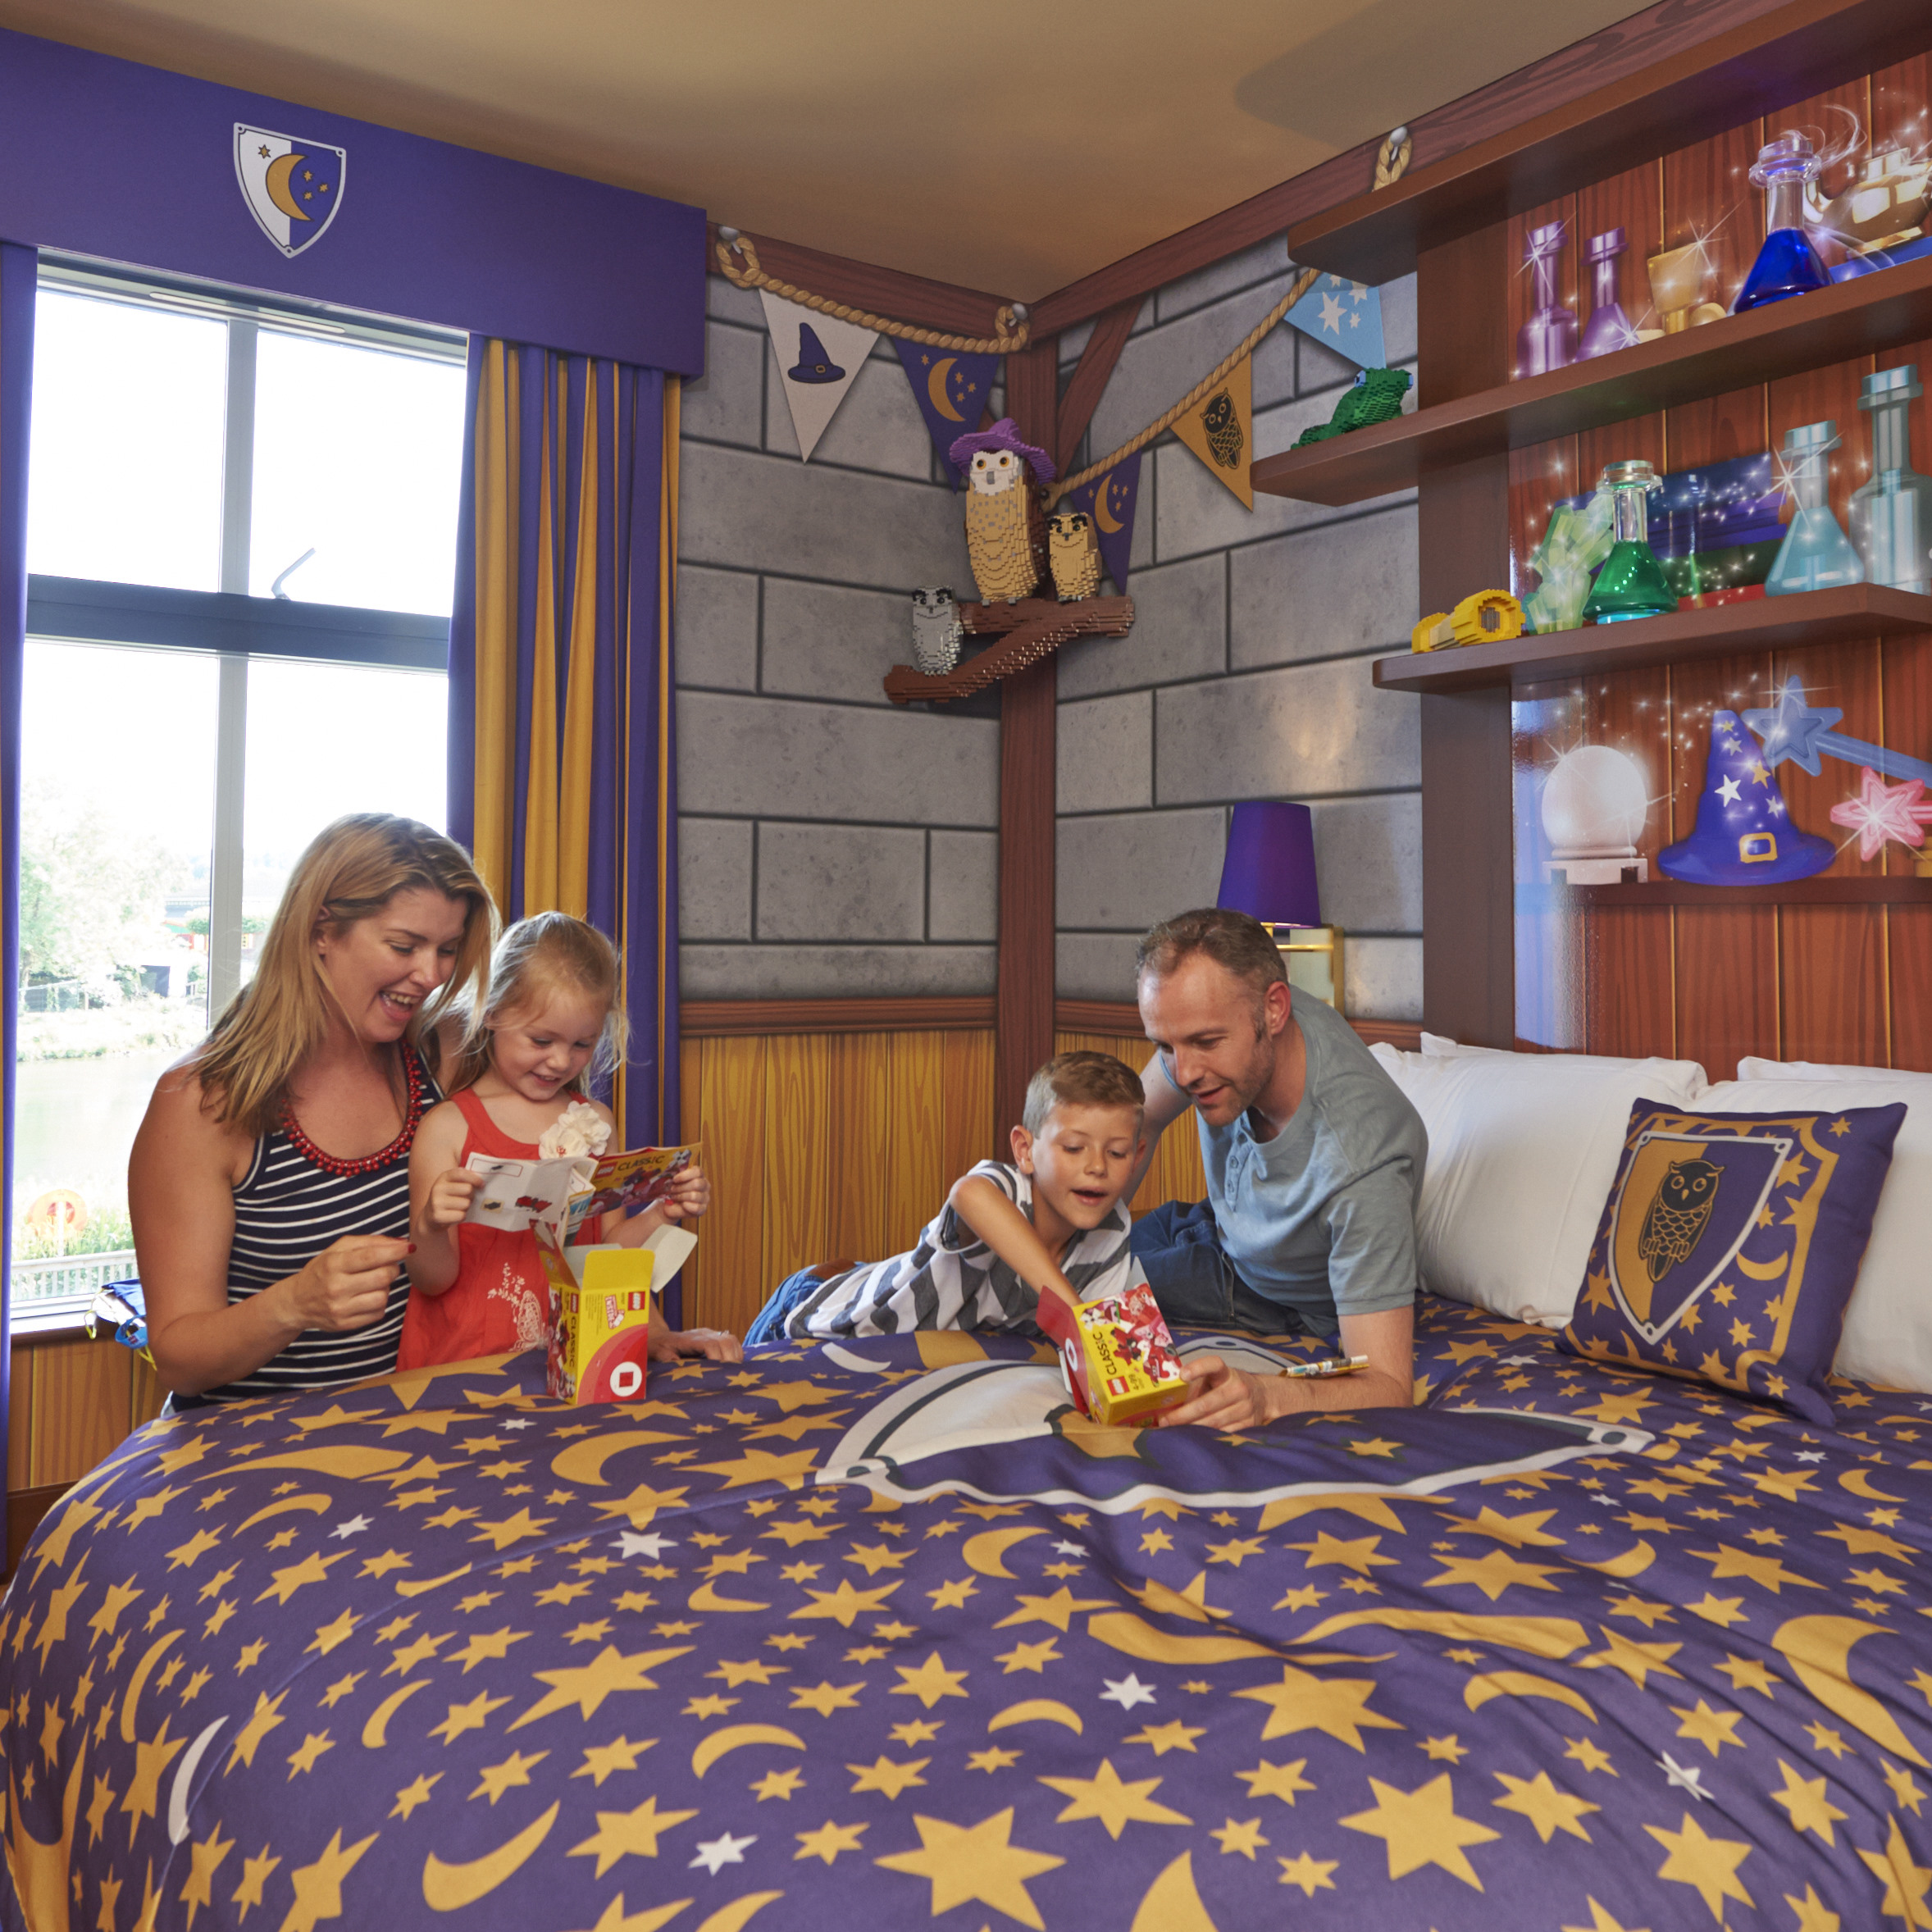 Family in Wizard's room at LEGOLAND Castle Hotel